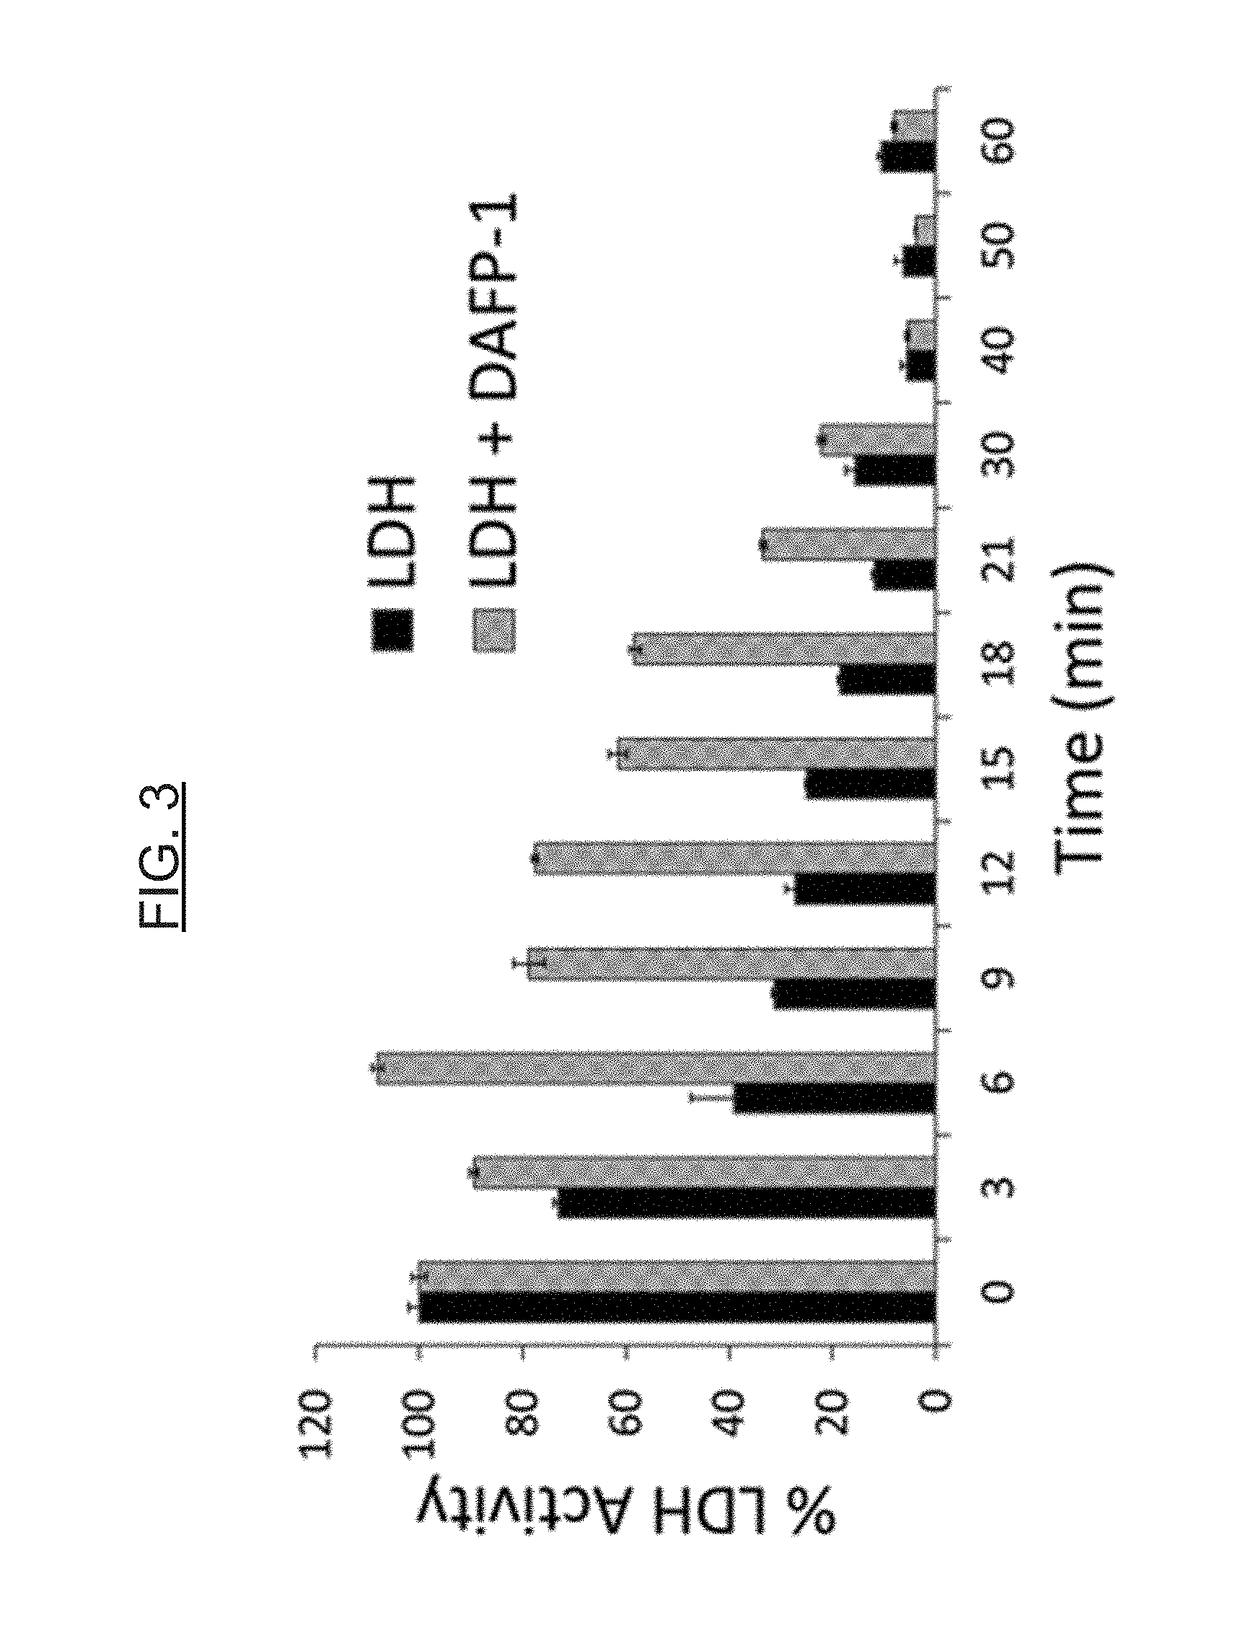 Composition and Method for the Protection of Proteins, Cell Components and Cells During Temperature Stress